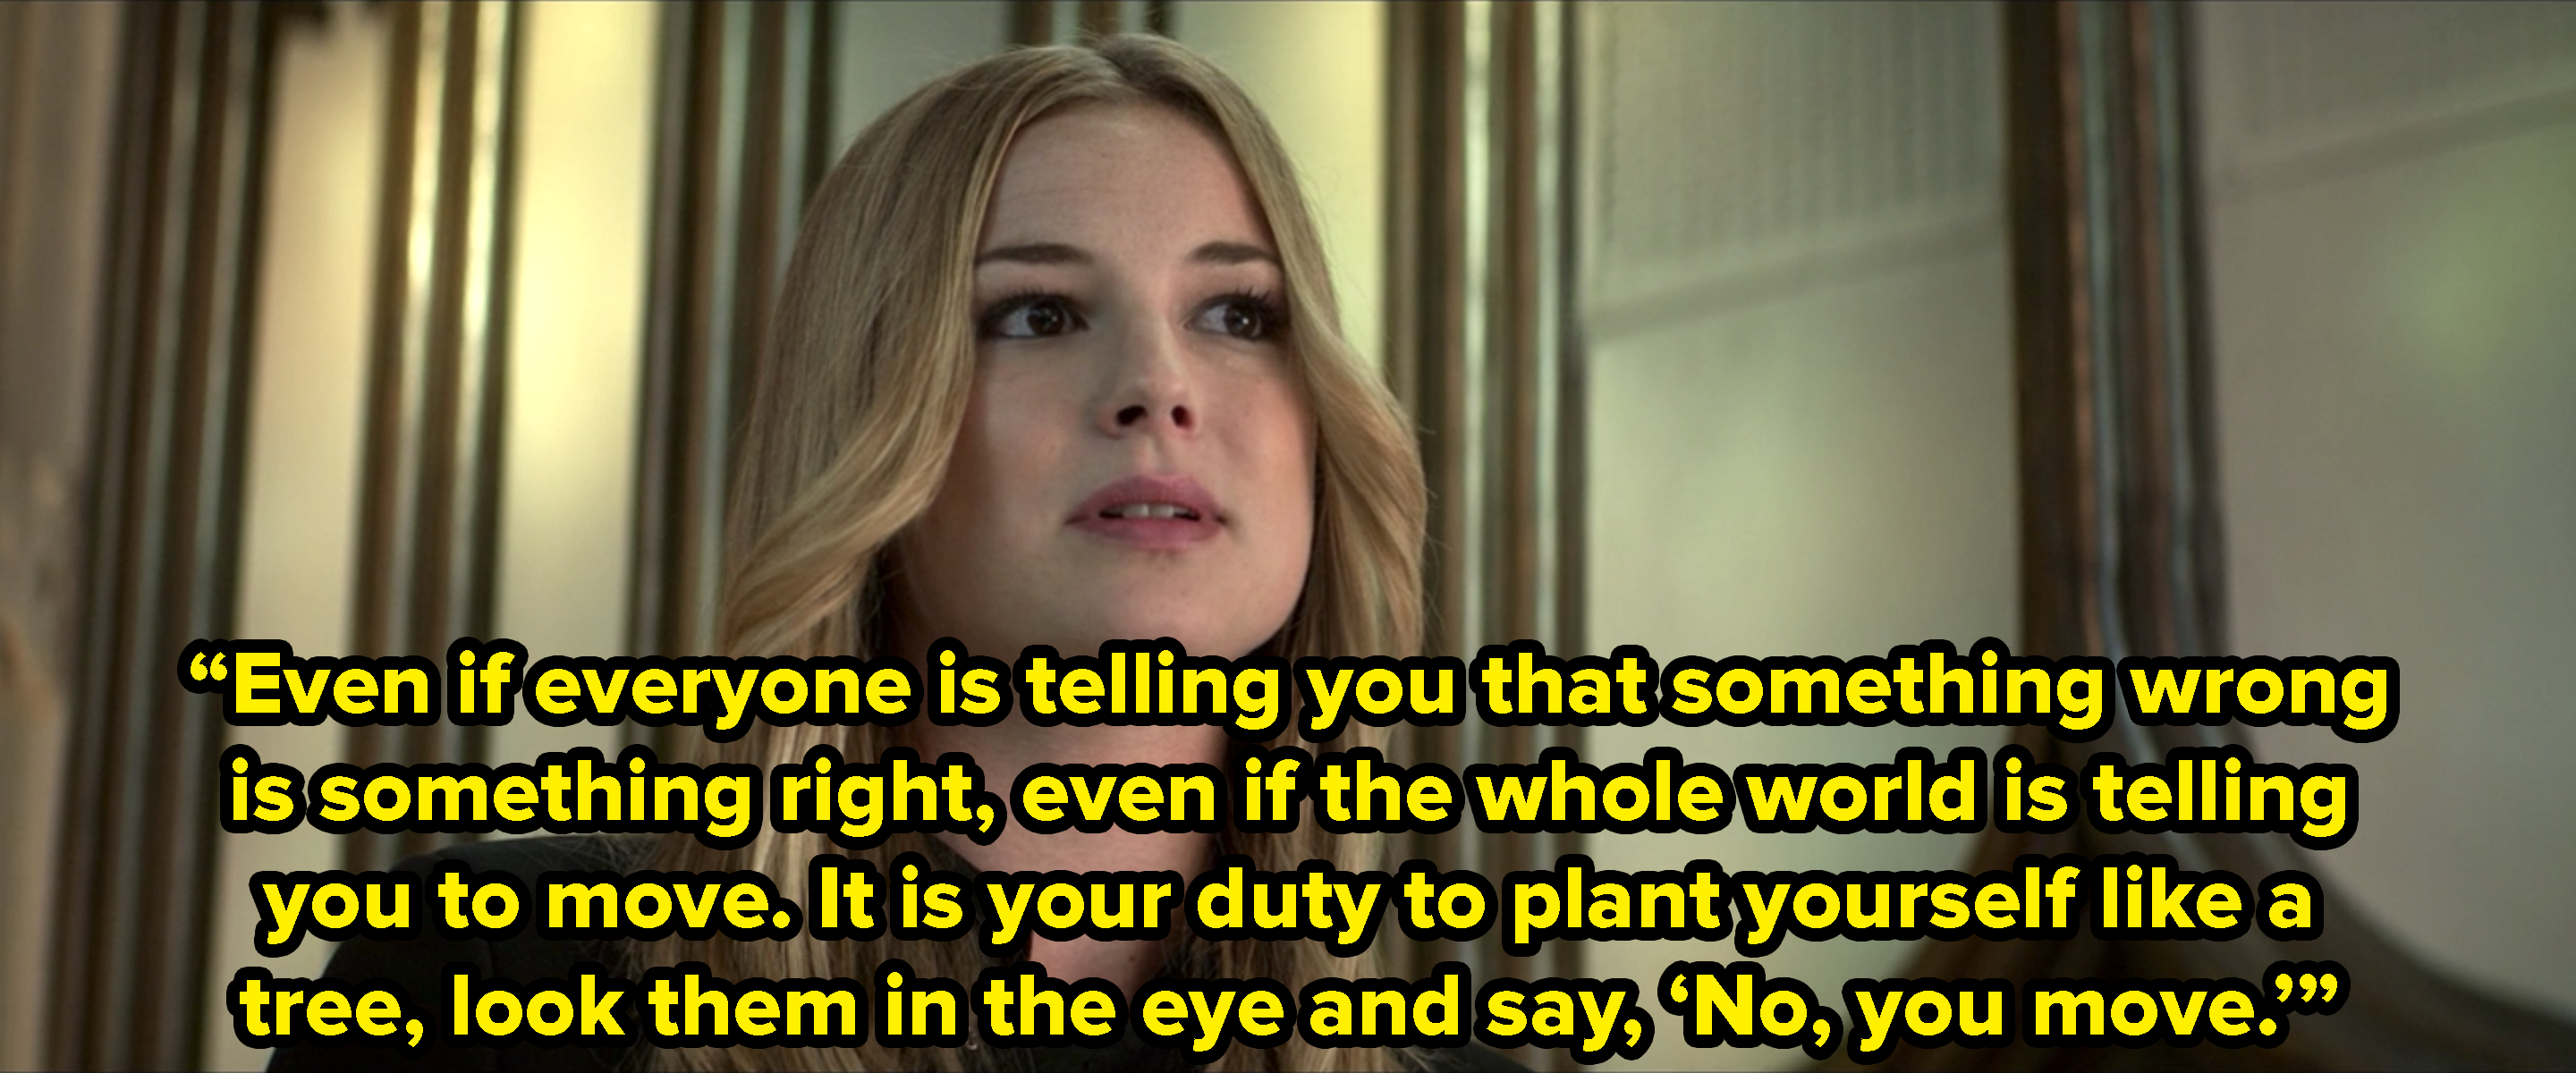 Sharon Carter saying, &quot;Even if everyone is telling you that something wrong is something right, even if the whole world is telling you to move, it is your duty to plant yourself like a tree, look them in the eye and say, &#x27;No, you move&#x27;&quot;